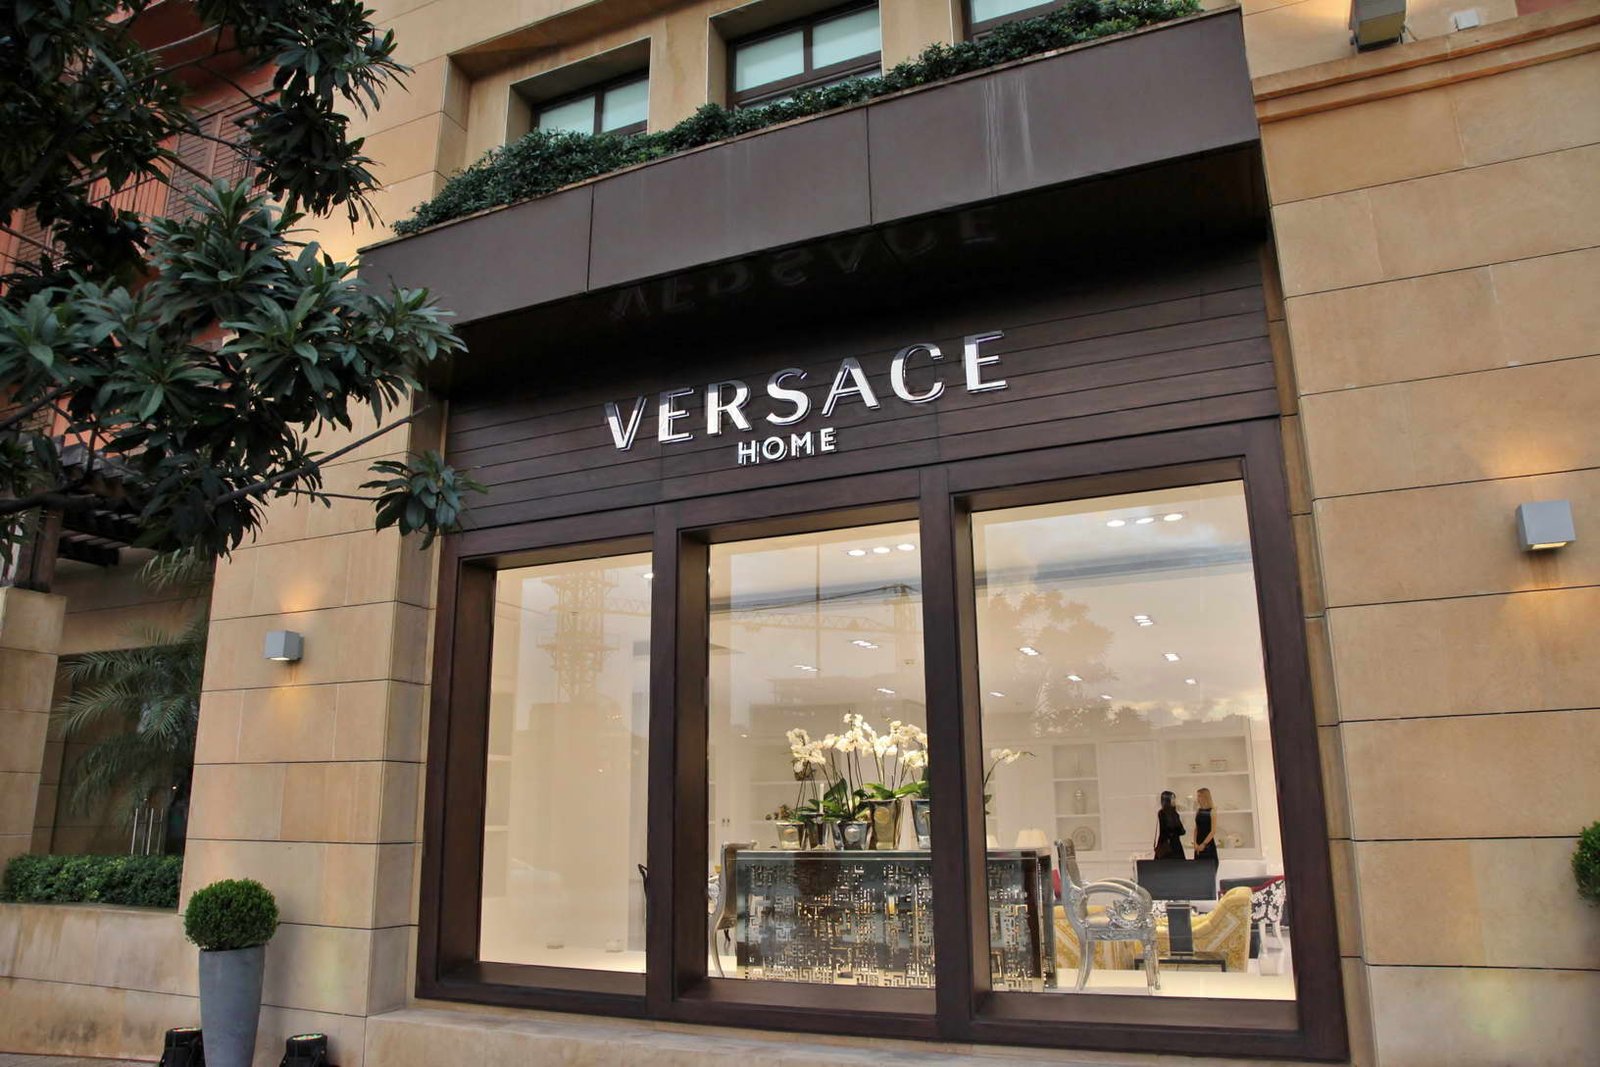 Versace Home Is All Set To Build Delhi’s Highest Luxury Apartments And We Have The Details!